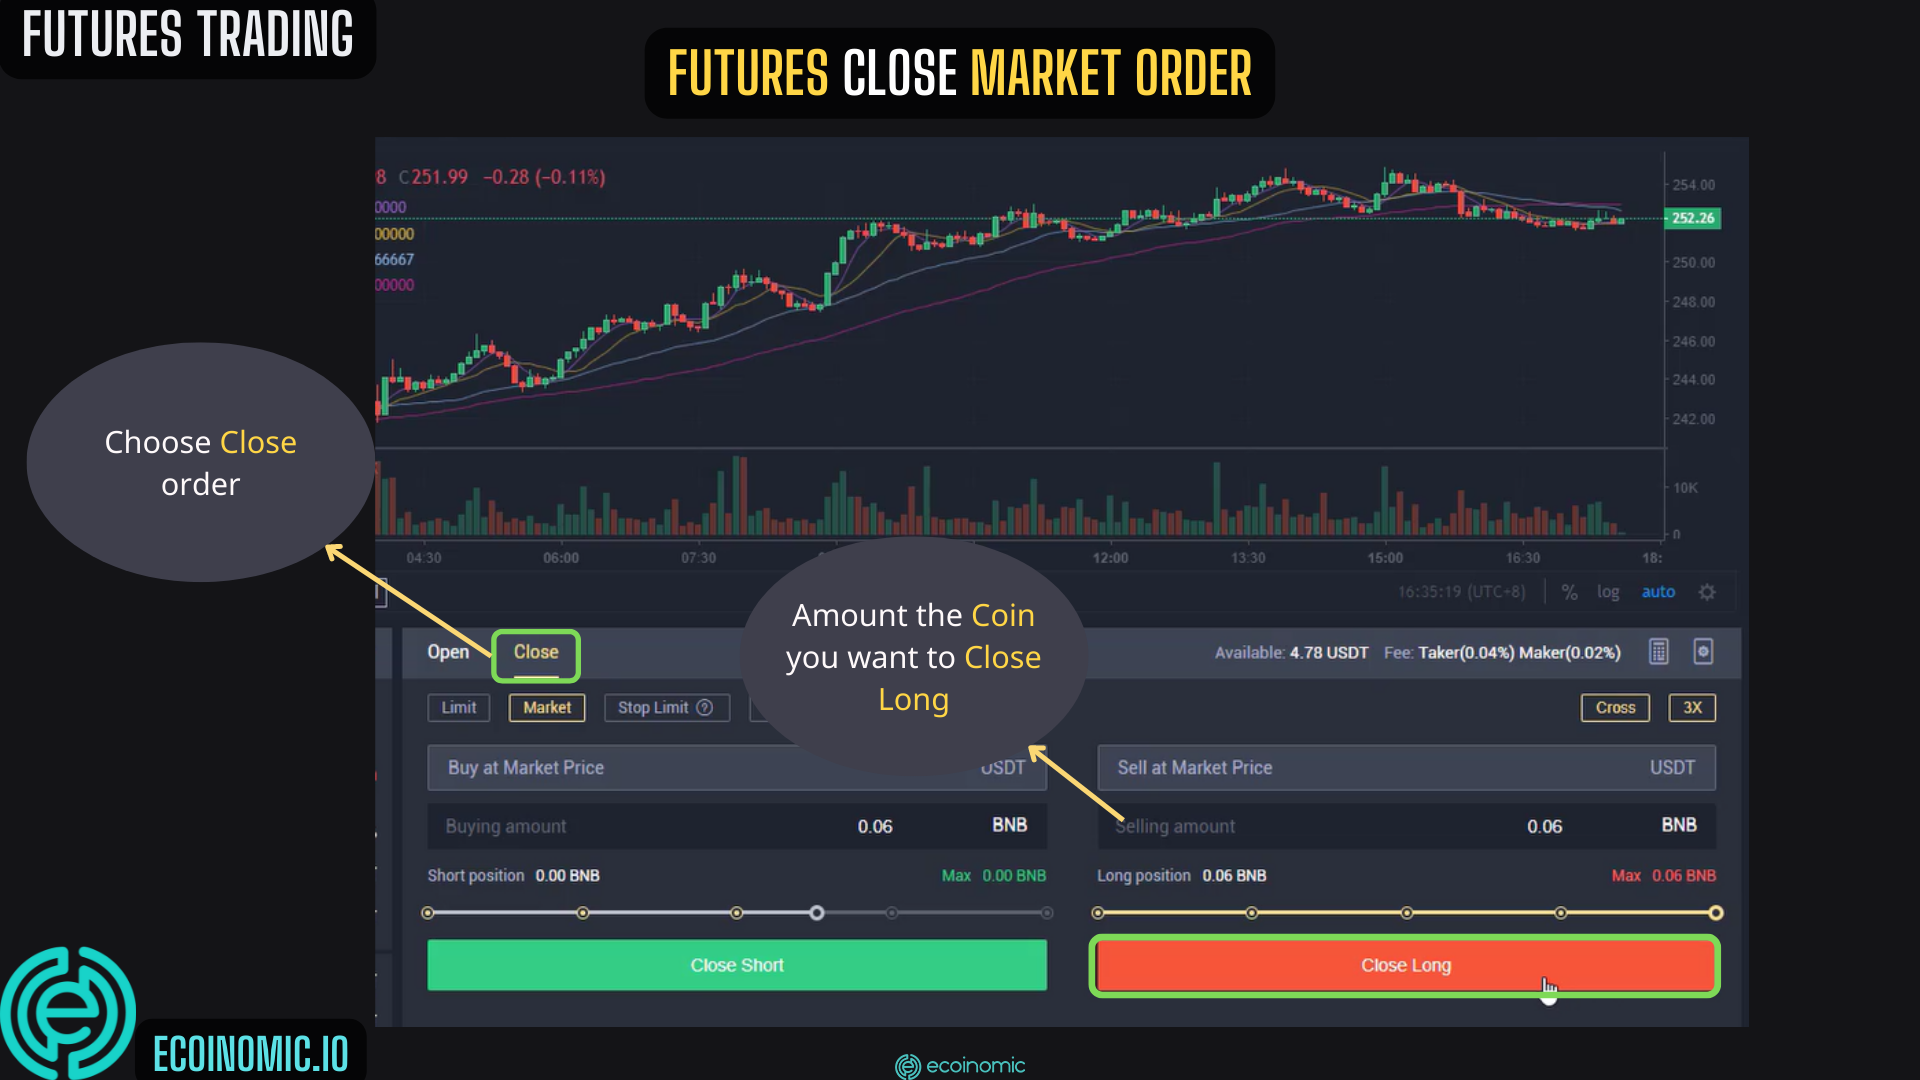 LBank Futures Trading Guide